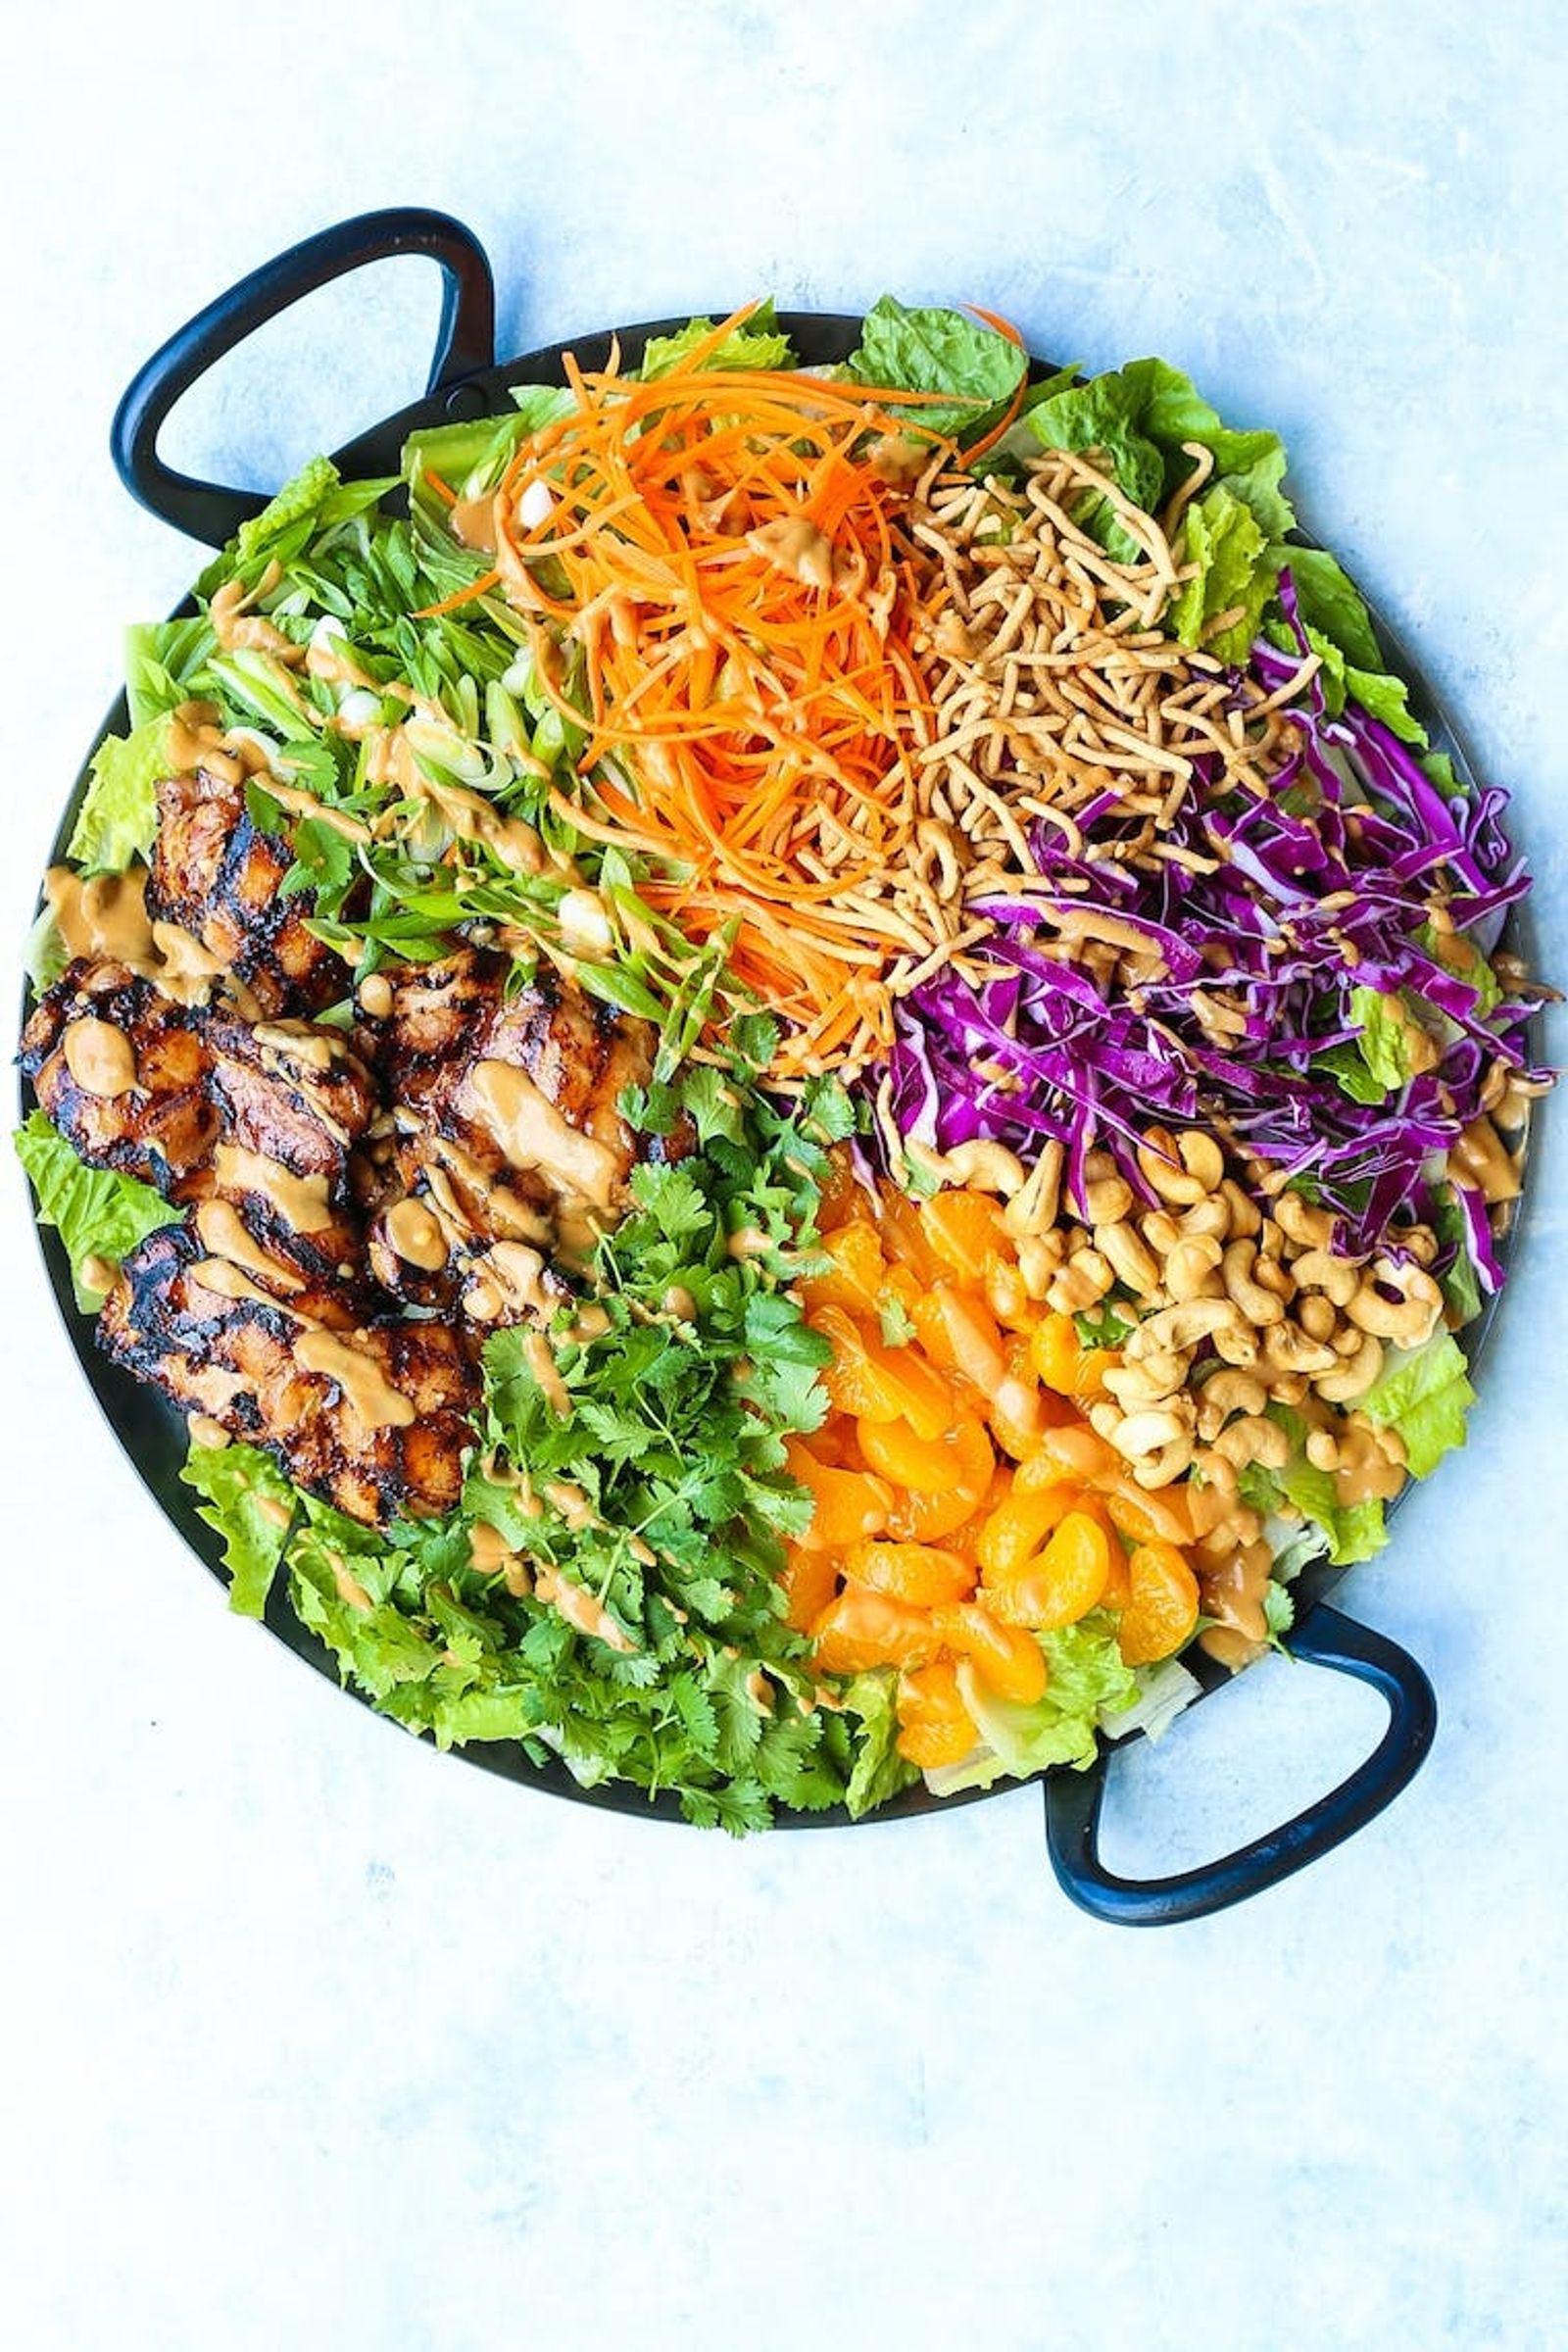 Use a store-bought rotisserie chicken for this salad, and you’ll have plenty of leftovers for the rest of the week. Switch up the fruits and veggies that you add on top – depending on your mood. The more colorful, the better! This is one veggie-packed easy lunch idea we can't get enough of. (via <strong><a href="https://damndelicious.net/2018/08/10/asian-chicken-salad/">Damn Delicious</a></strong>)